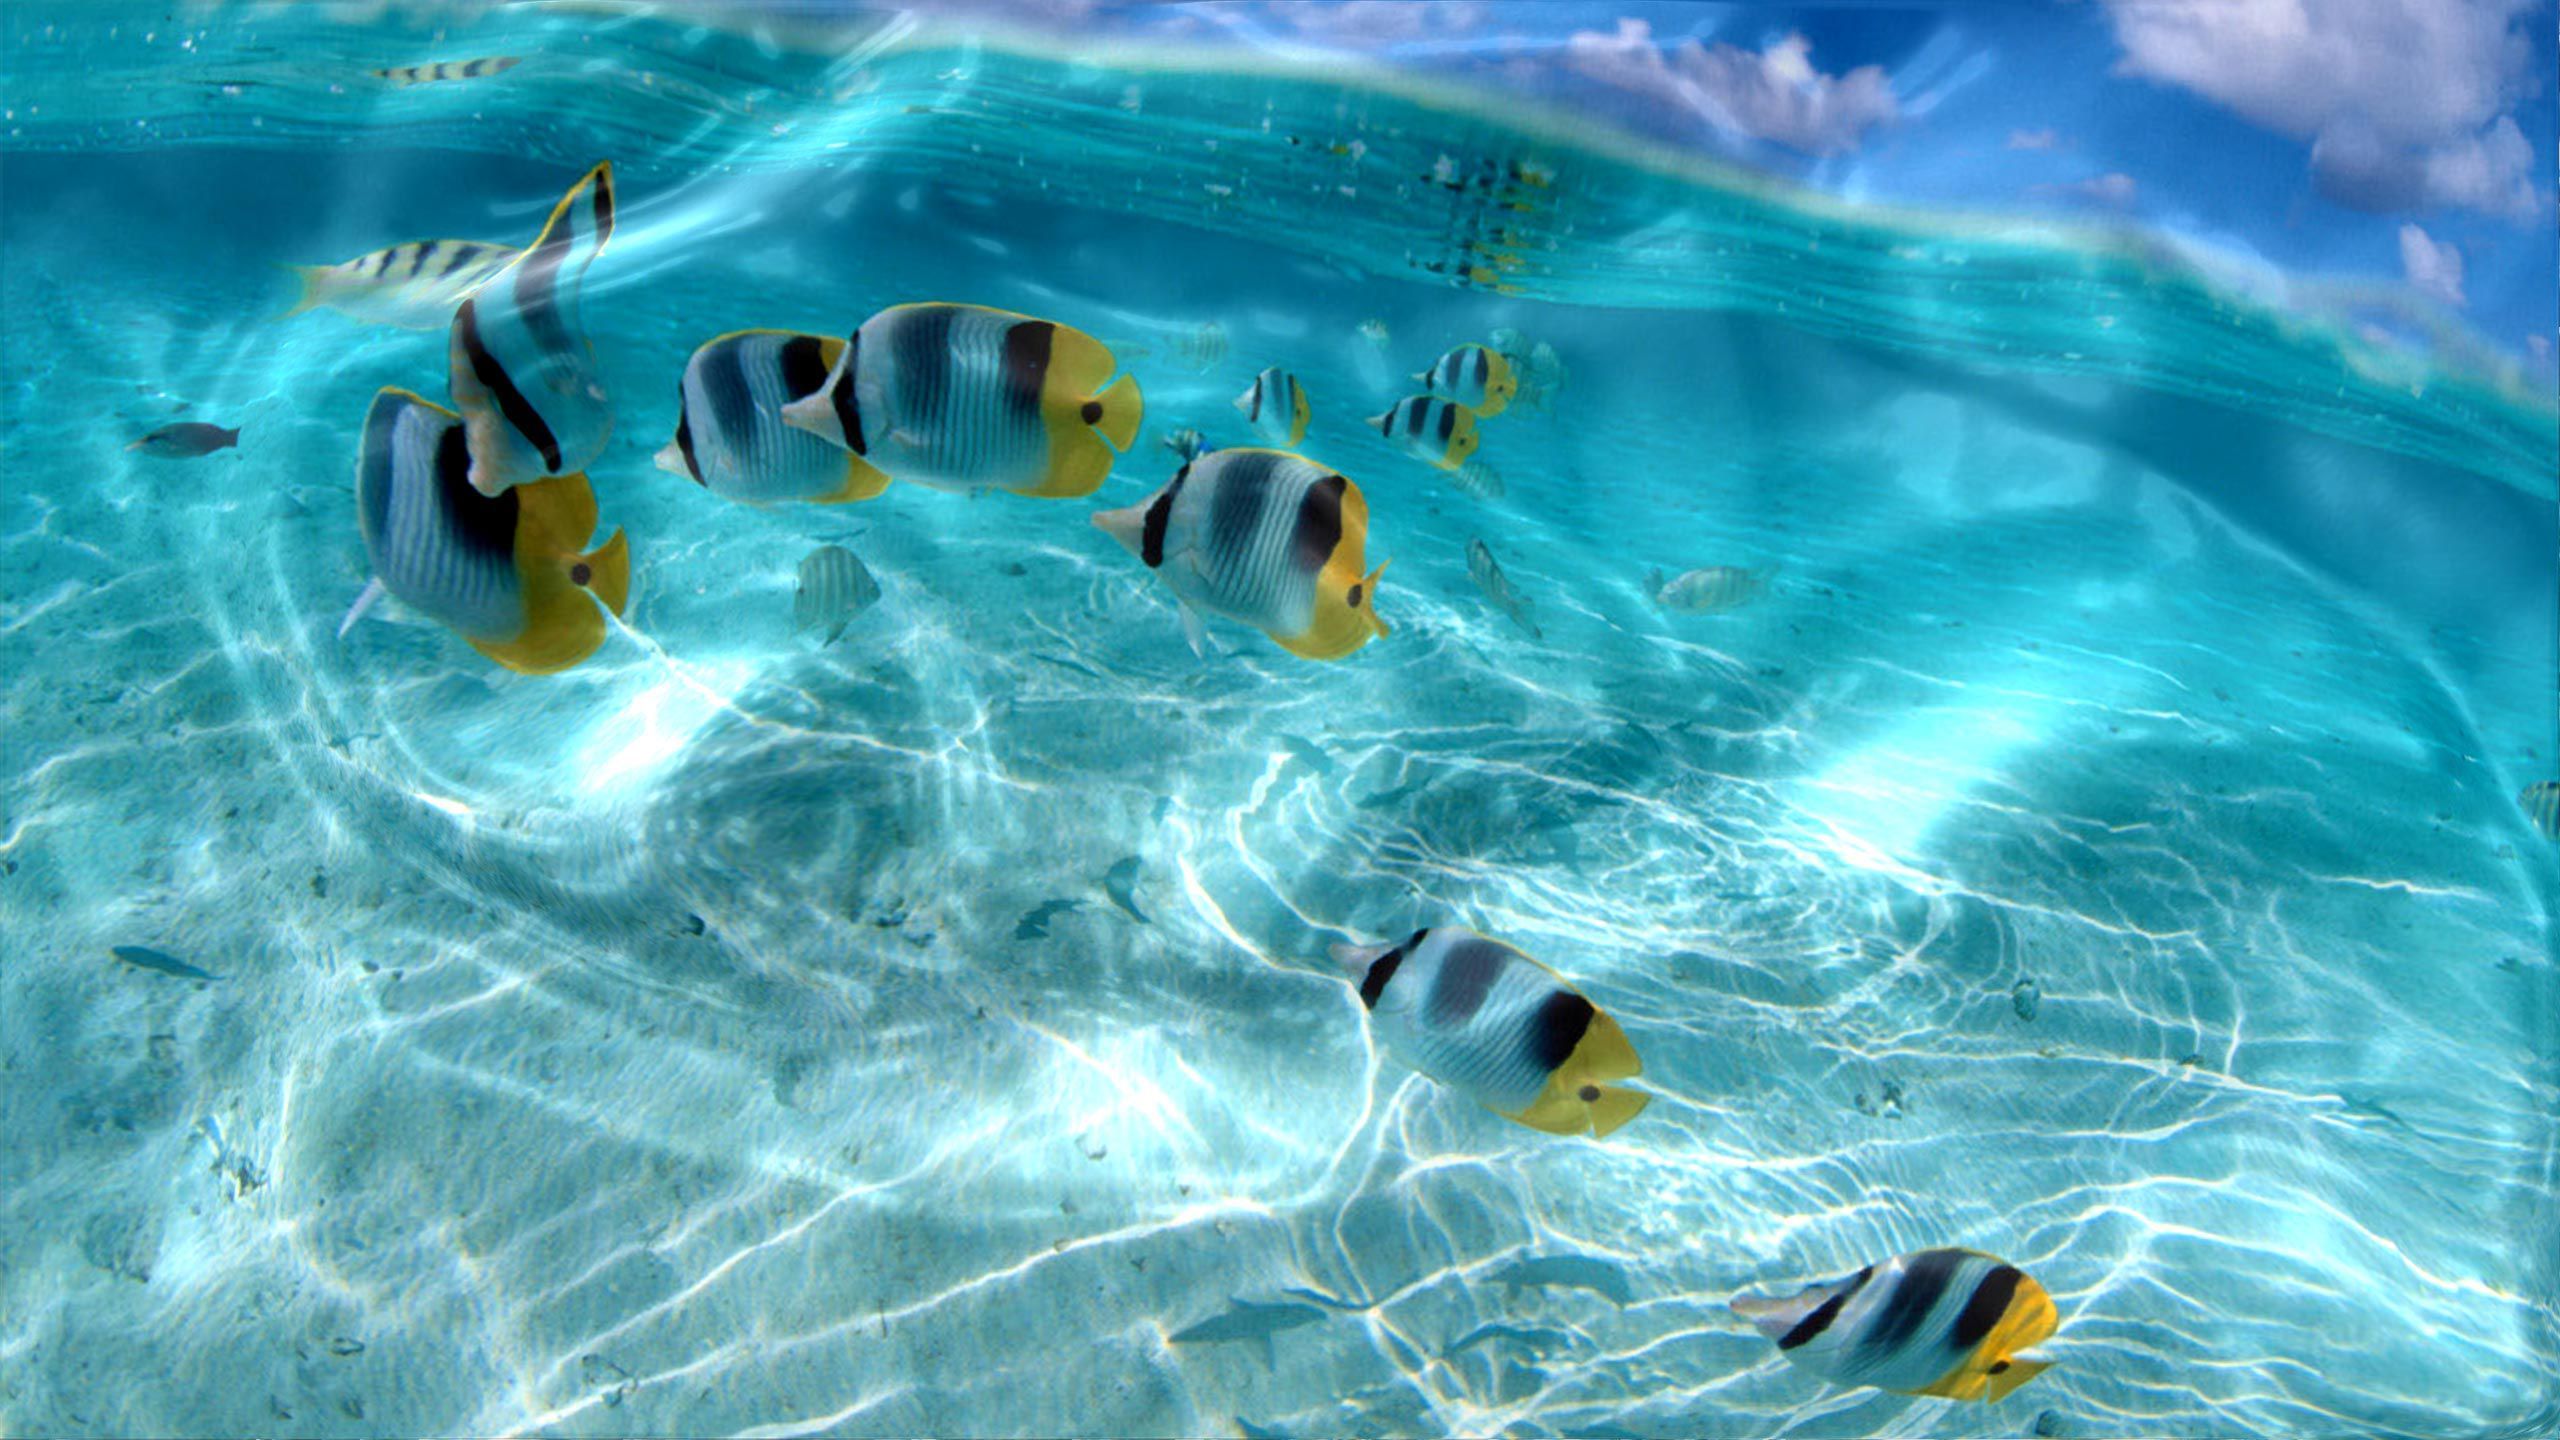 Water Fish Live Wallpaper For Pc Free Download. coral fish 3D live wallpaper android apps on google play. fishes sea turtle water fish live wallpaper for pc free download. fishes wallpaper page